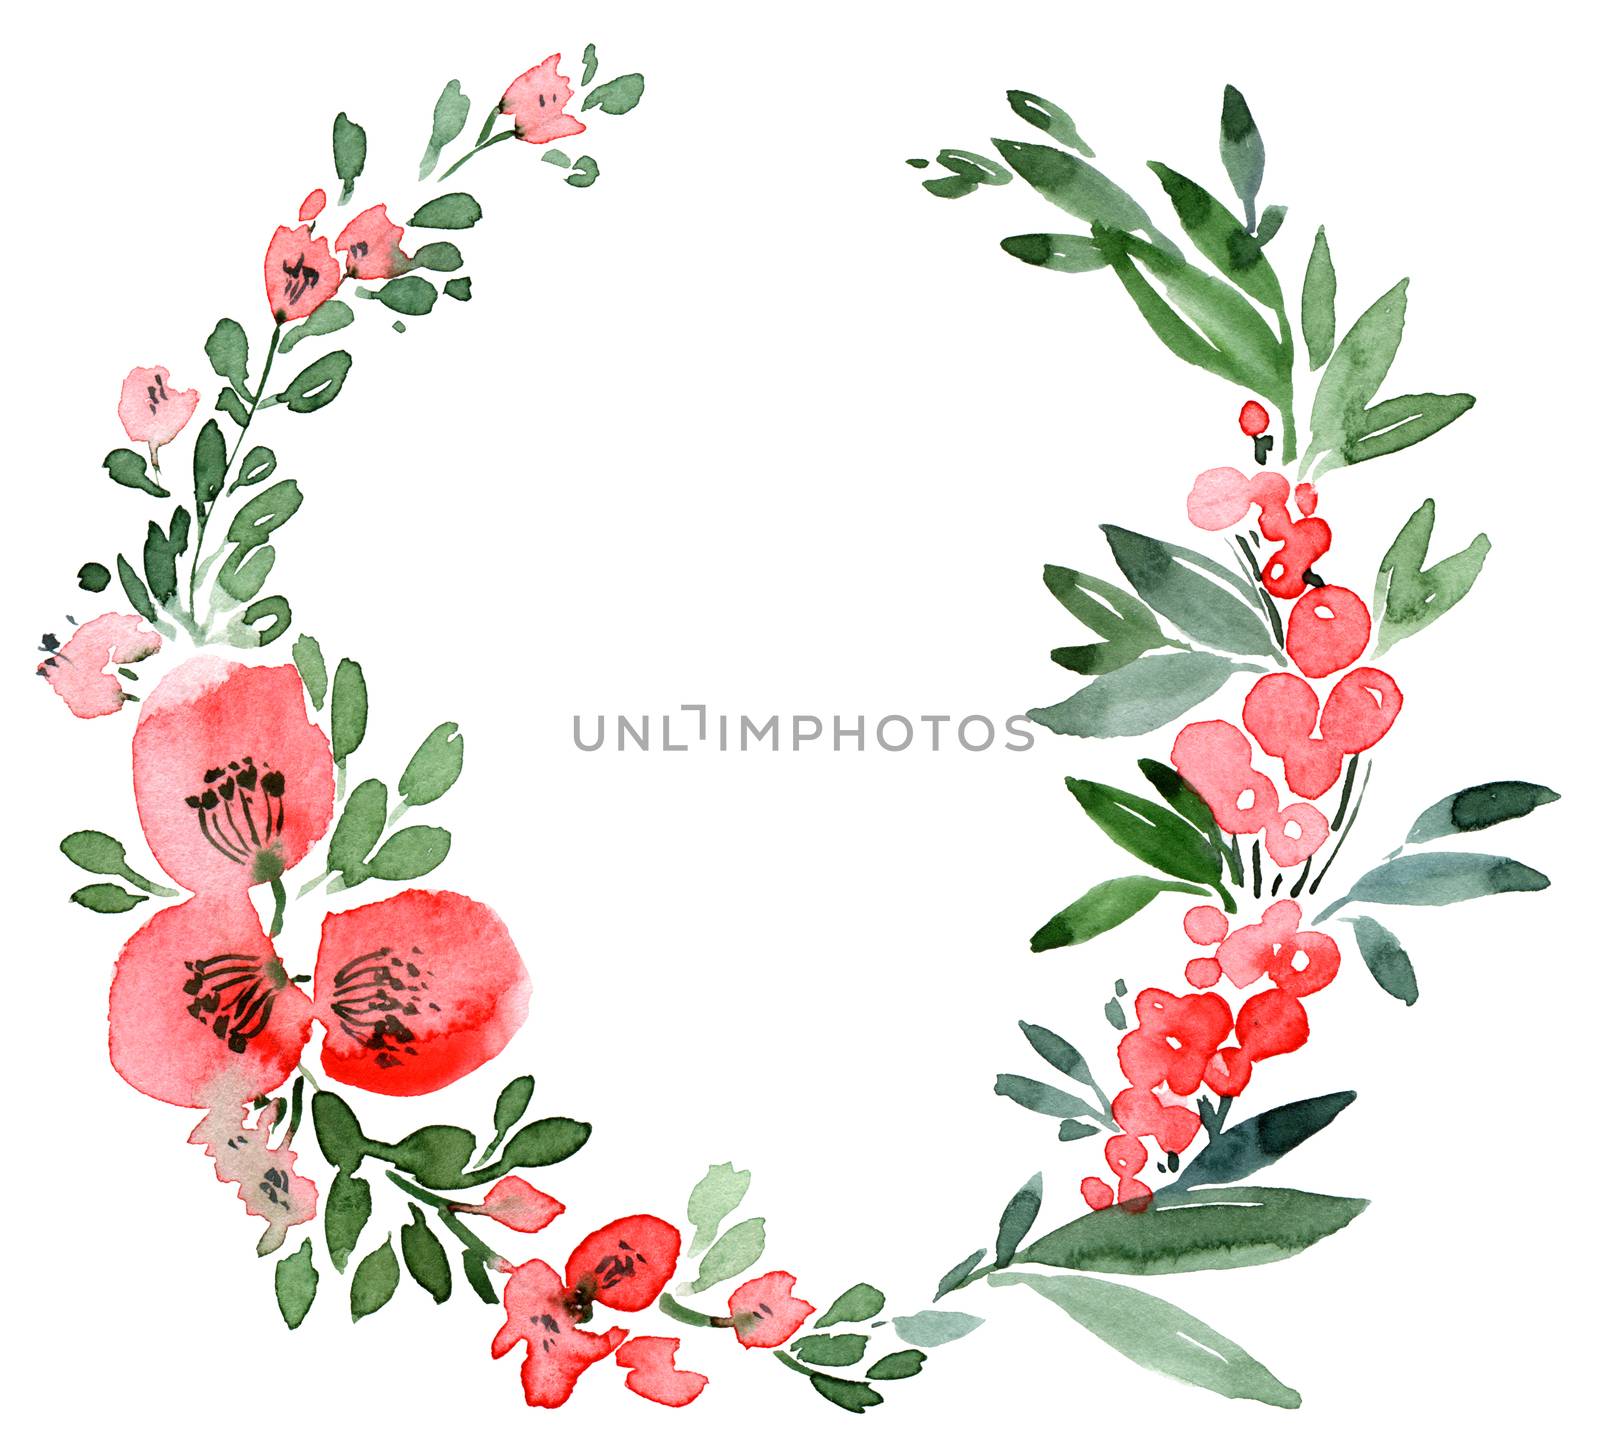 Floral wreath with poppy flowers, leaves and berries. Botanical illustrations. Watercolor frame.